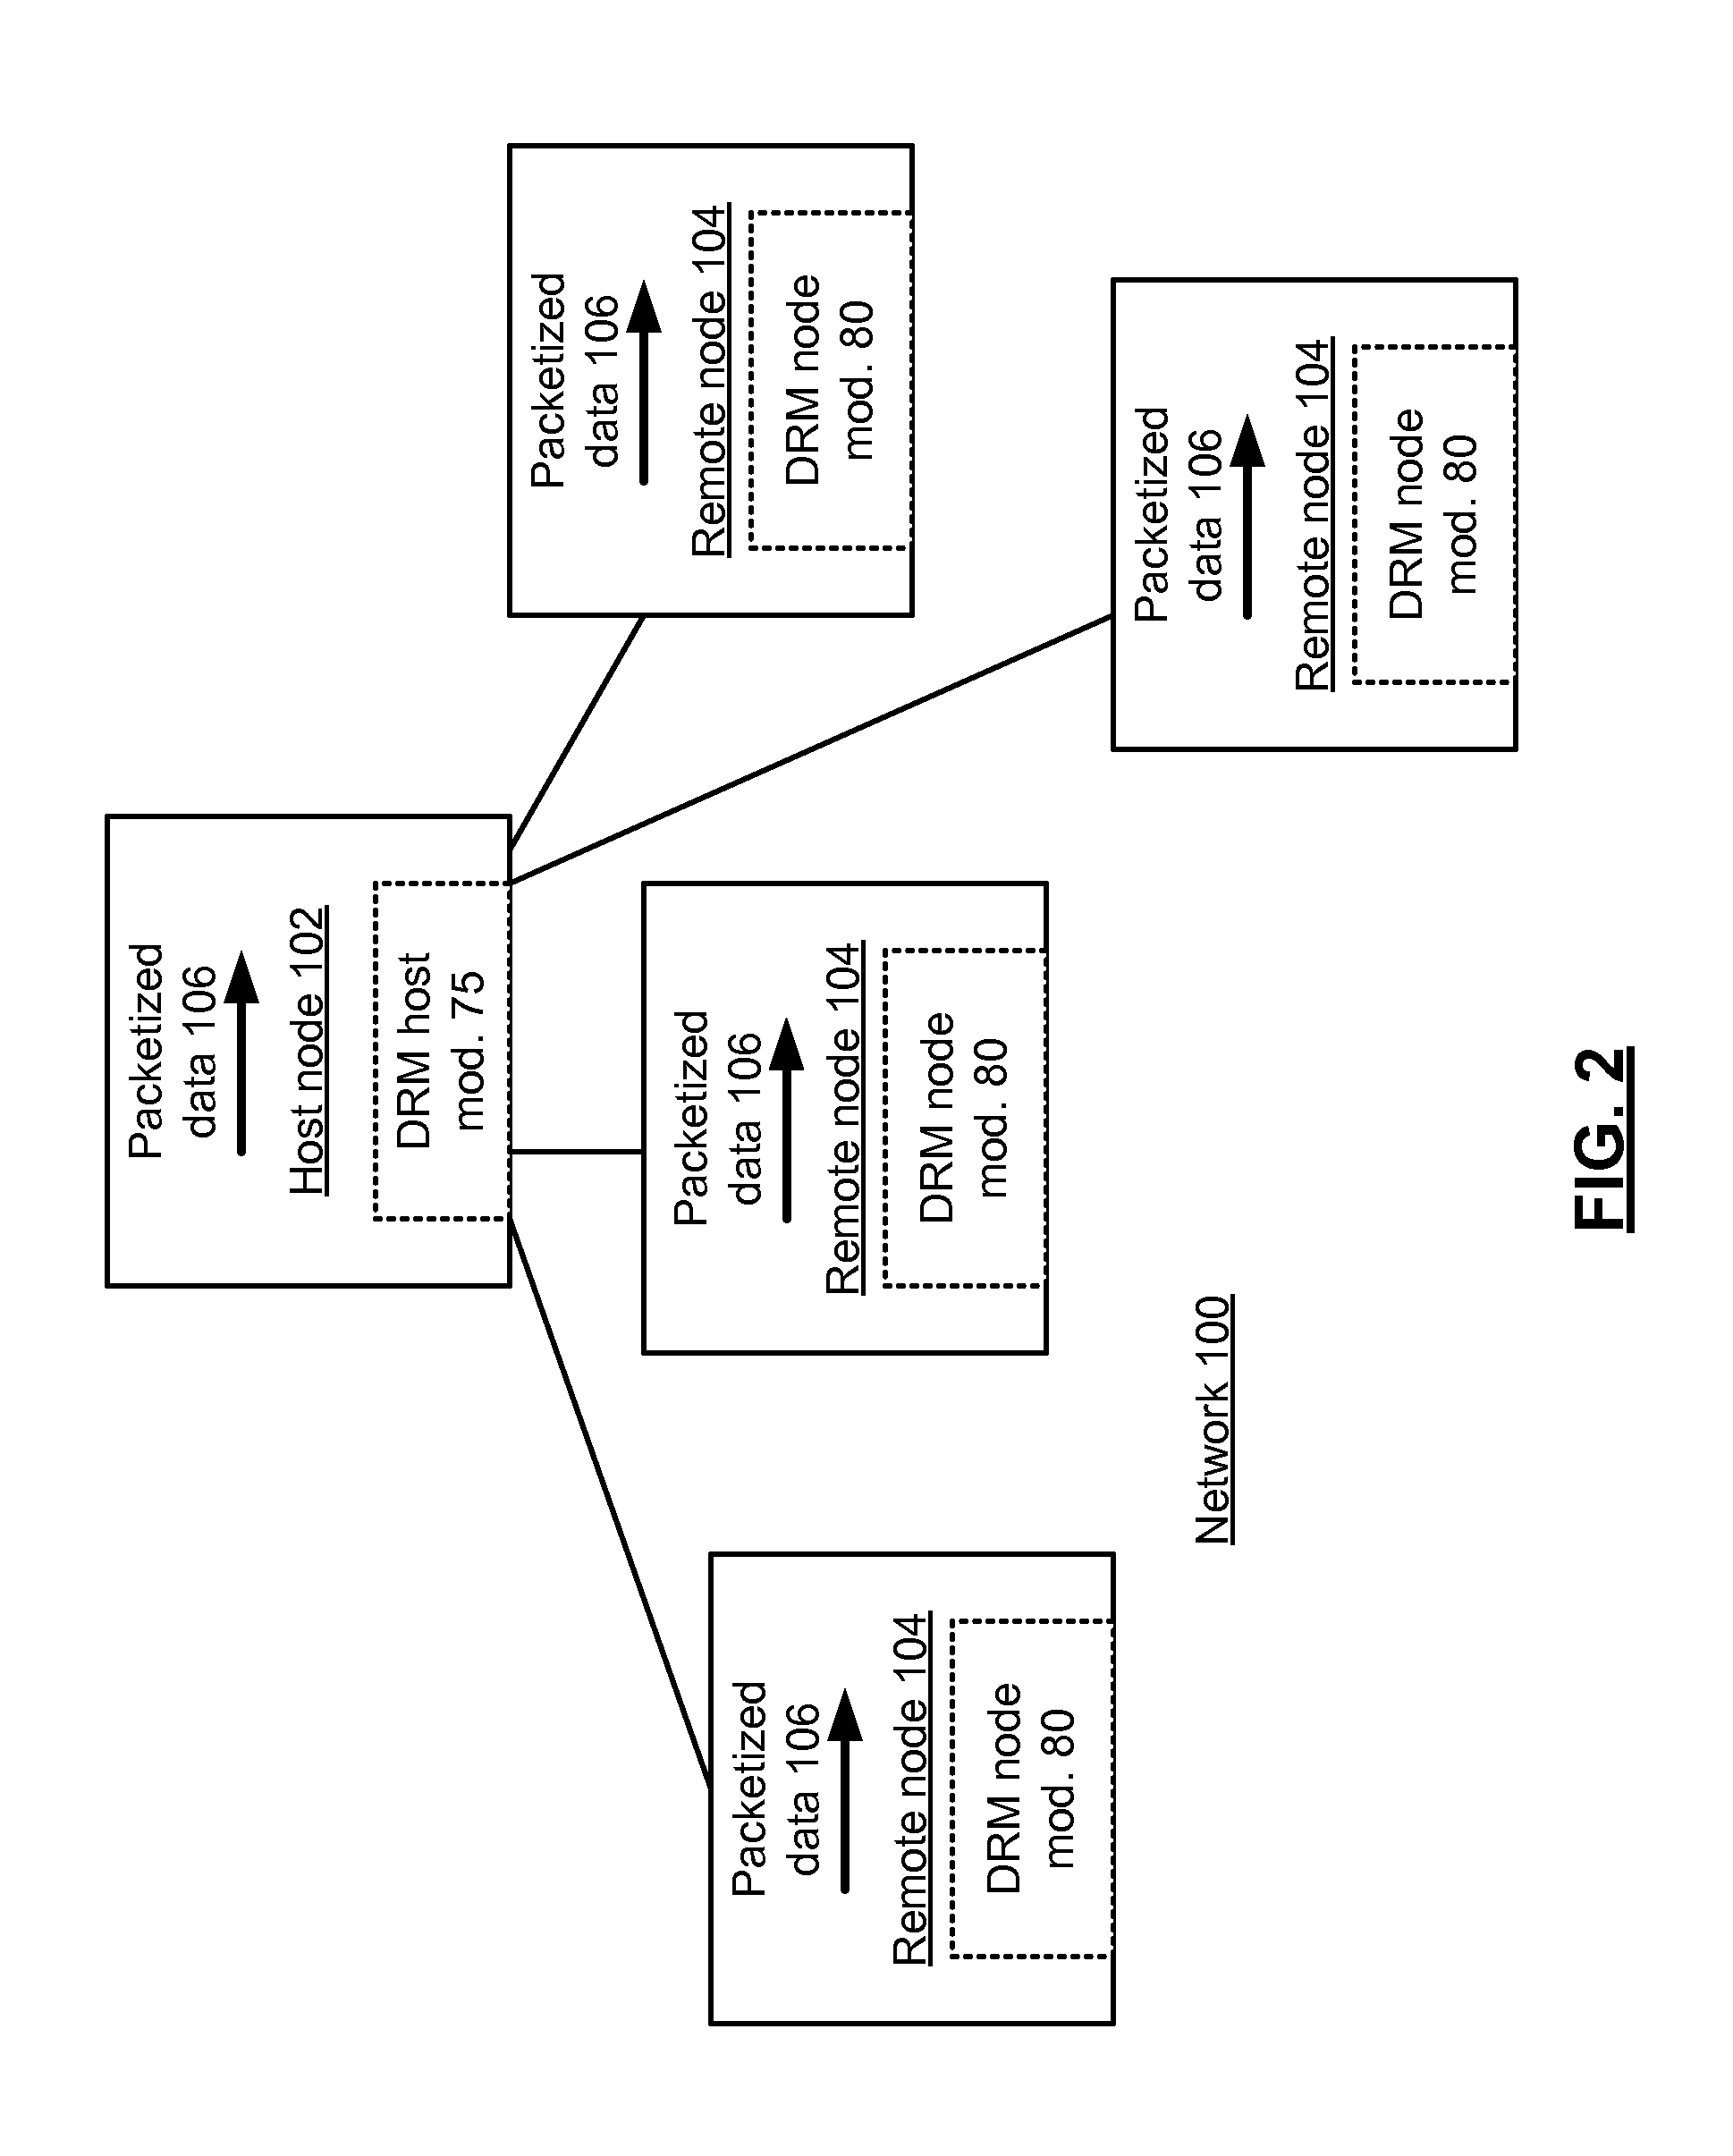 Distributed digital rights management node module and methods for use therewith